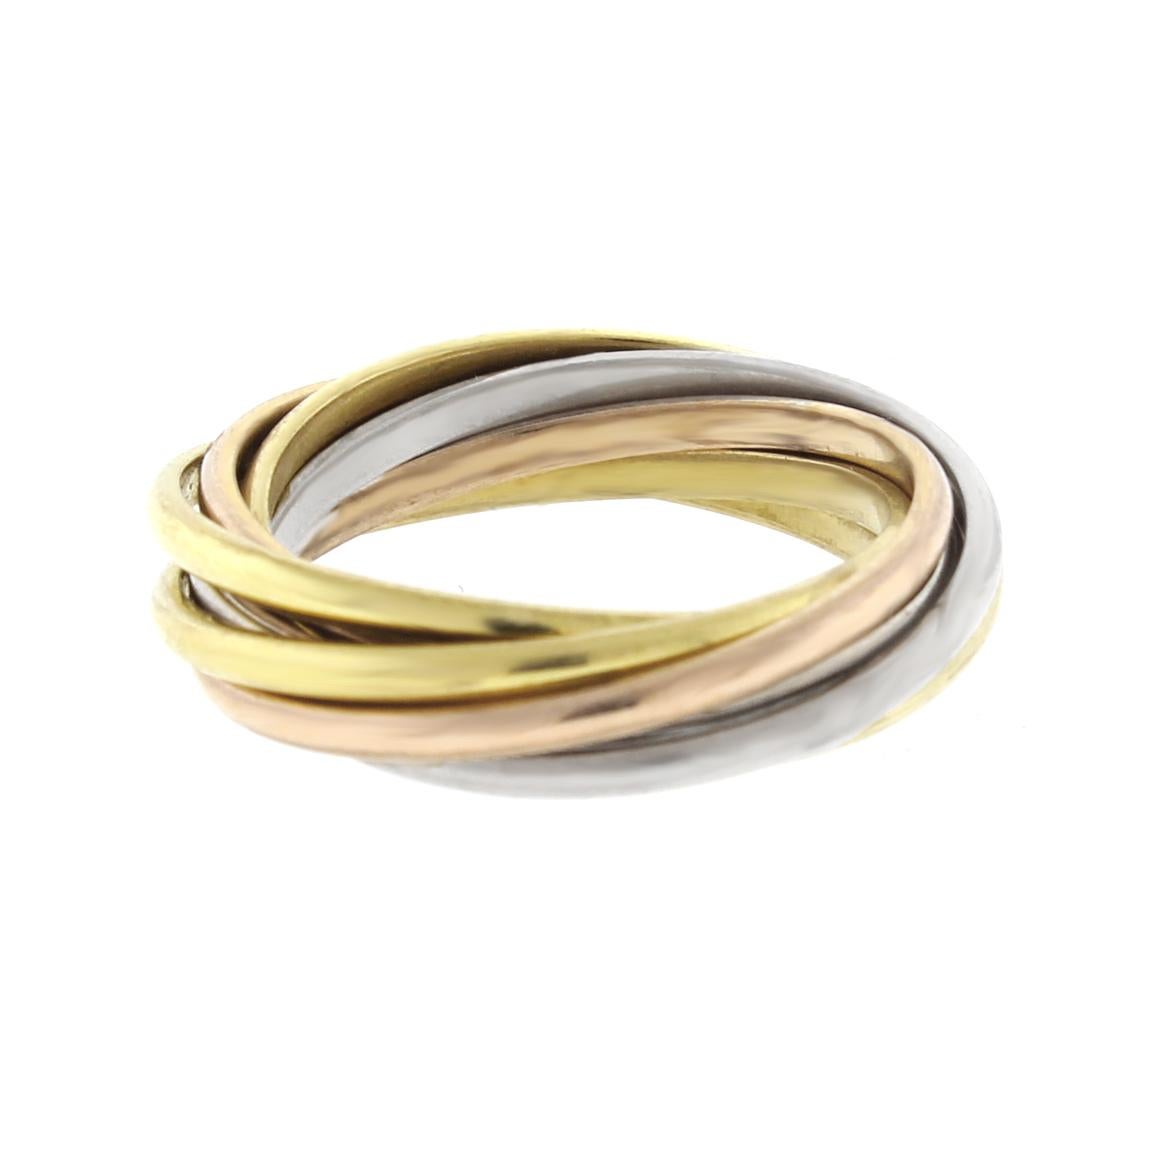 Three bands. Three colors. Pink gold, yellow gold and white gold, intertwined in a display of mystery and harmony. Cartier’s timeless trinity ring.
♦ Designer: Cartier 
♦ Metal: 18 karat white yellow and pink gold
♦ Size 50   US5 ½
♦ Circa 1995
♦